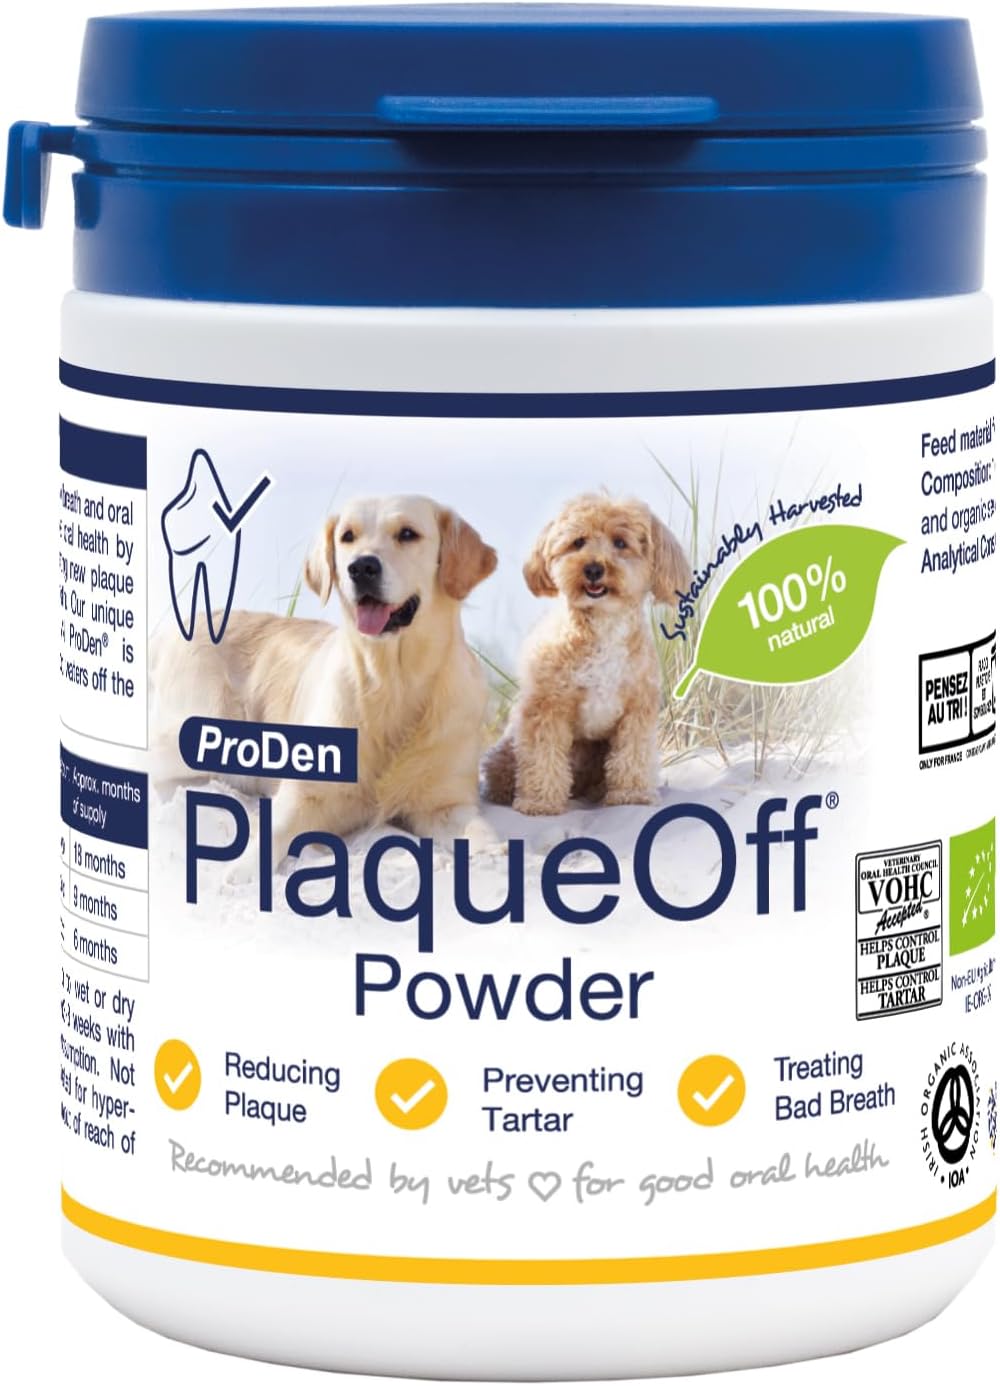 ProDen PlaqueOff Powder 180g | For Dogs and Cats |Bad Breath, Plaque, Tartar?PD04006